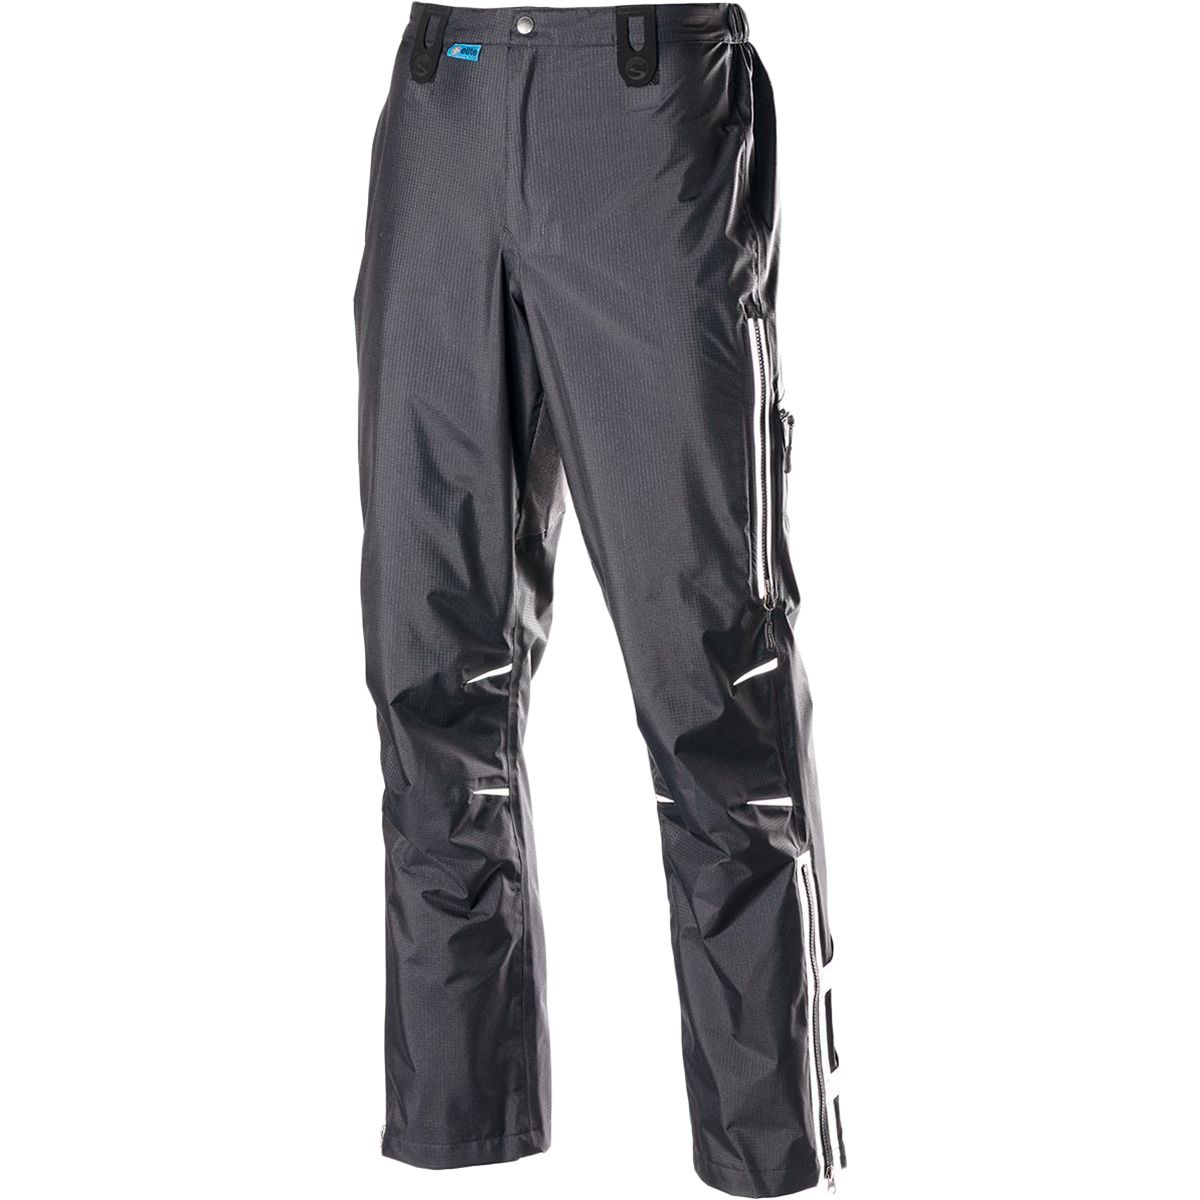 Review – Showers Pass Refuge Waterproof Cycling Trousers